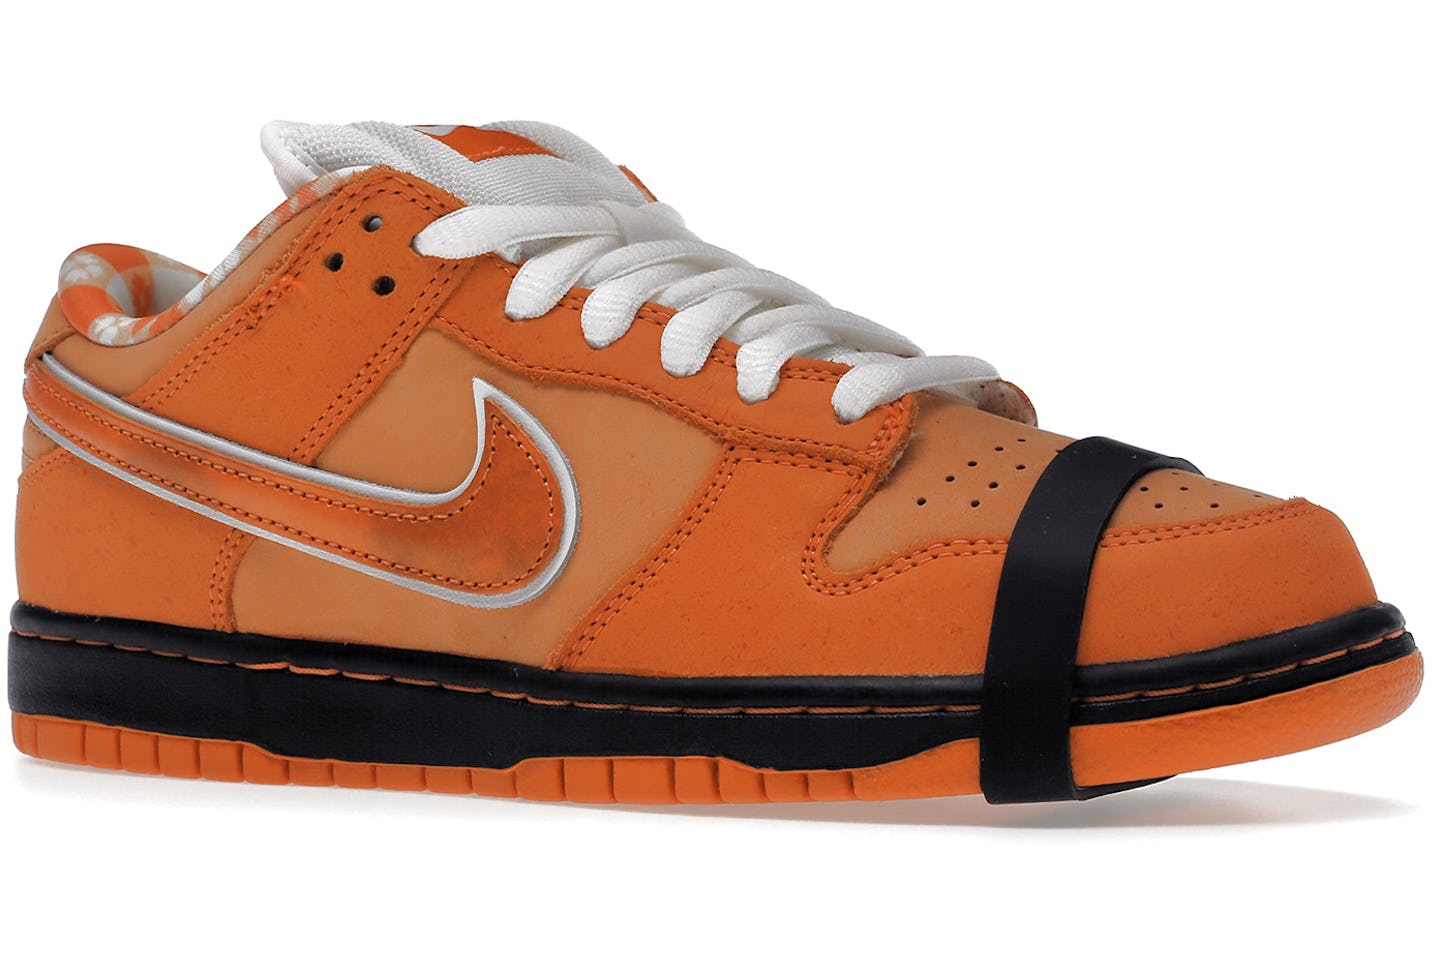 Nike SB Dunk Low Concepts Orange Lobster “Special Box”